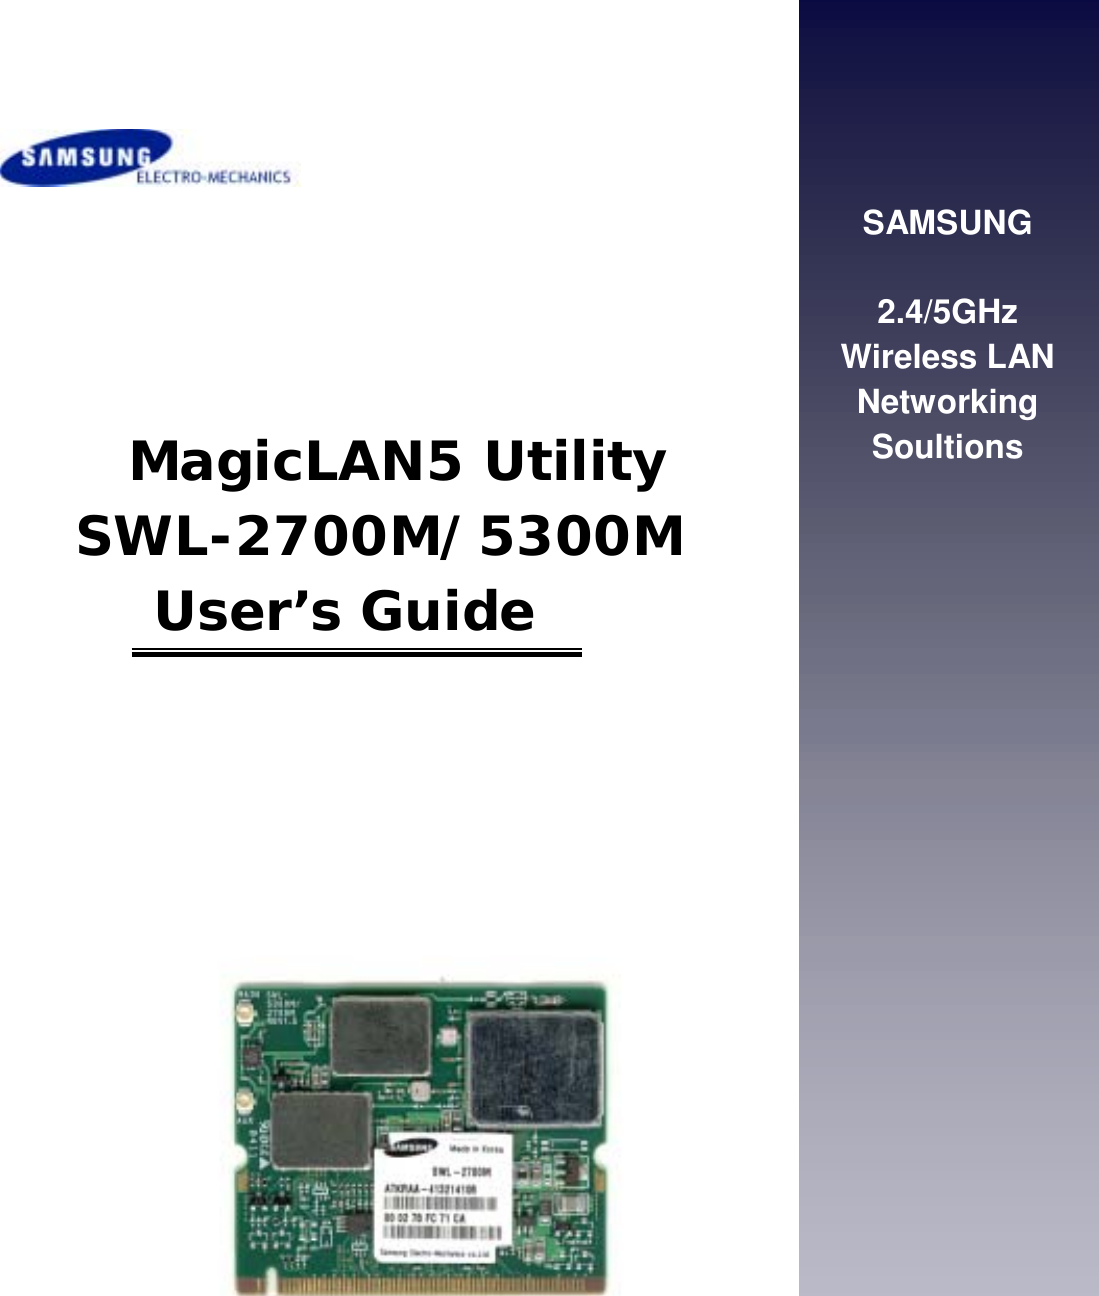  MagicLAN5 Utility SWL-2700M/5300M User’s GuideSAMSUNG   2.4/5GHz  Wireless LAN Networking Soultions 